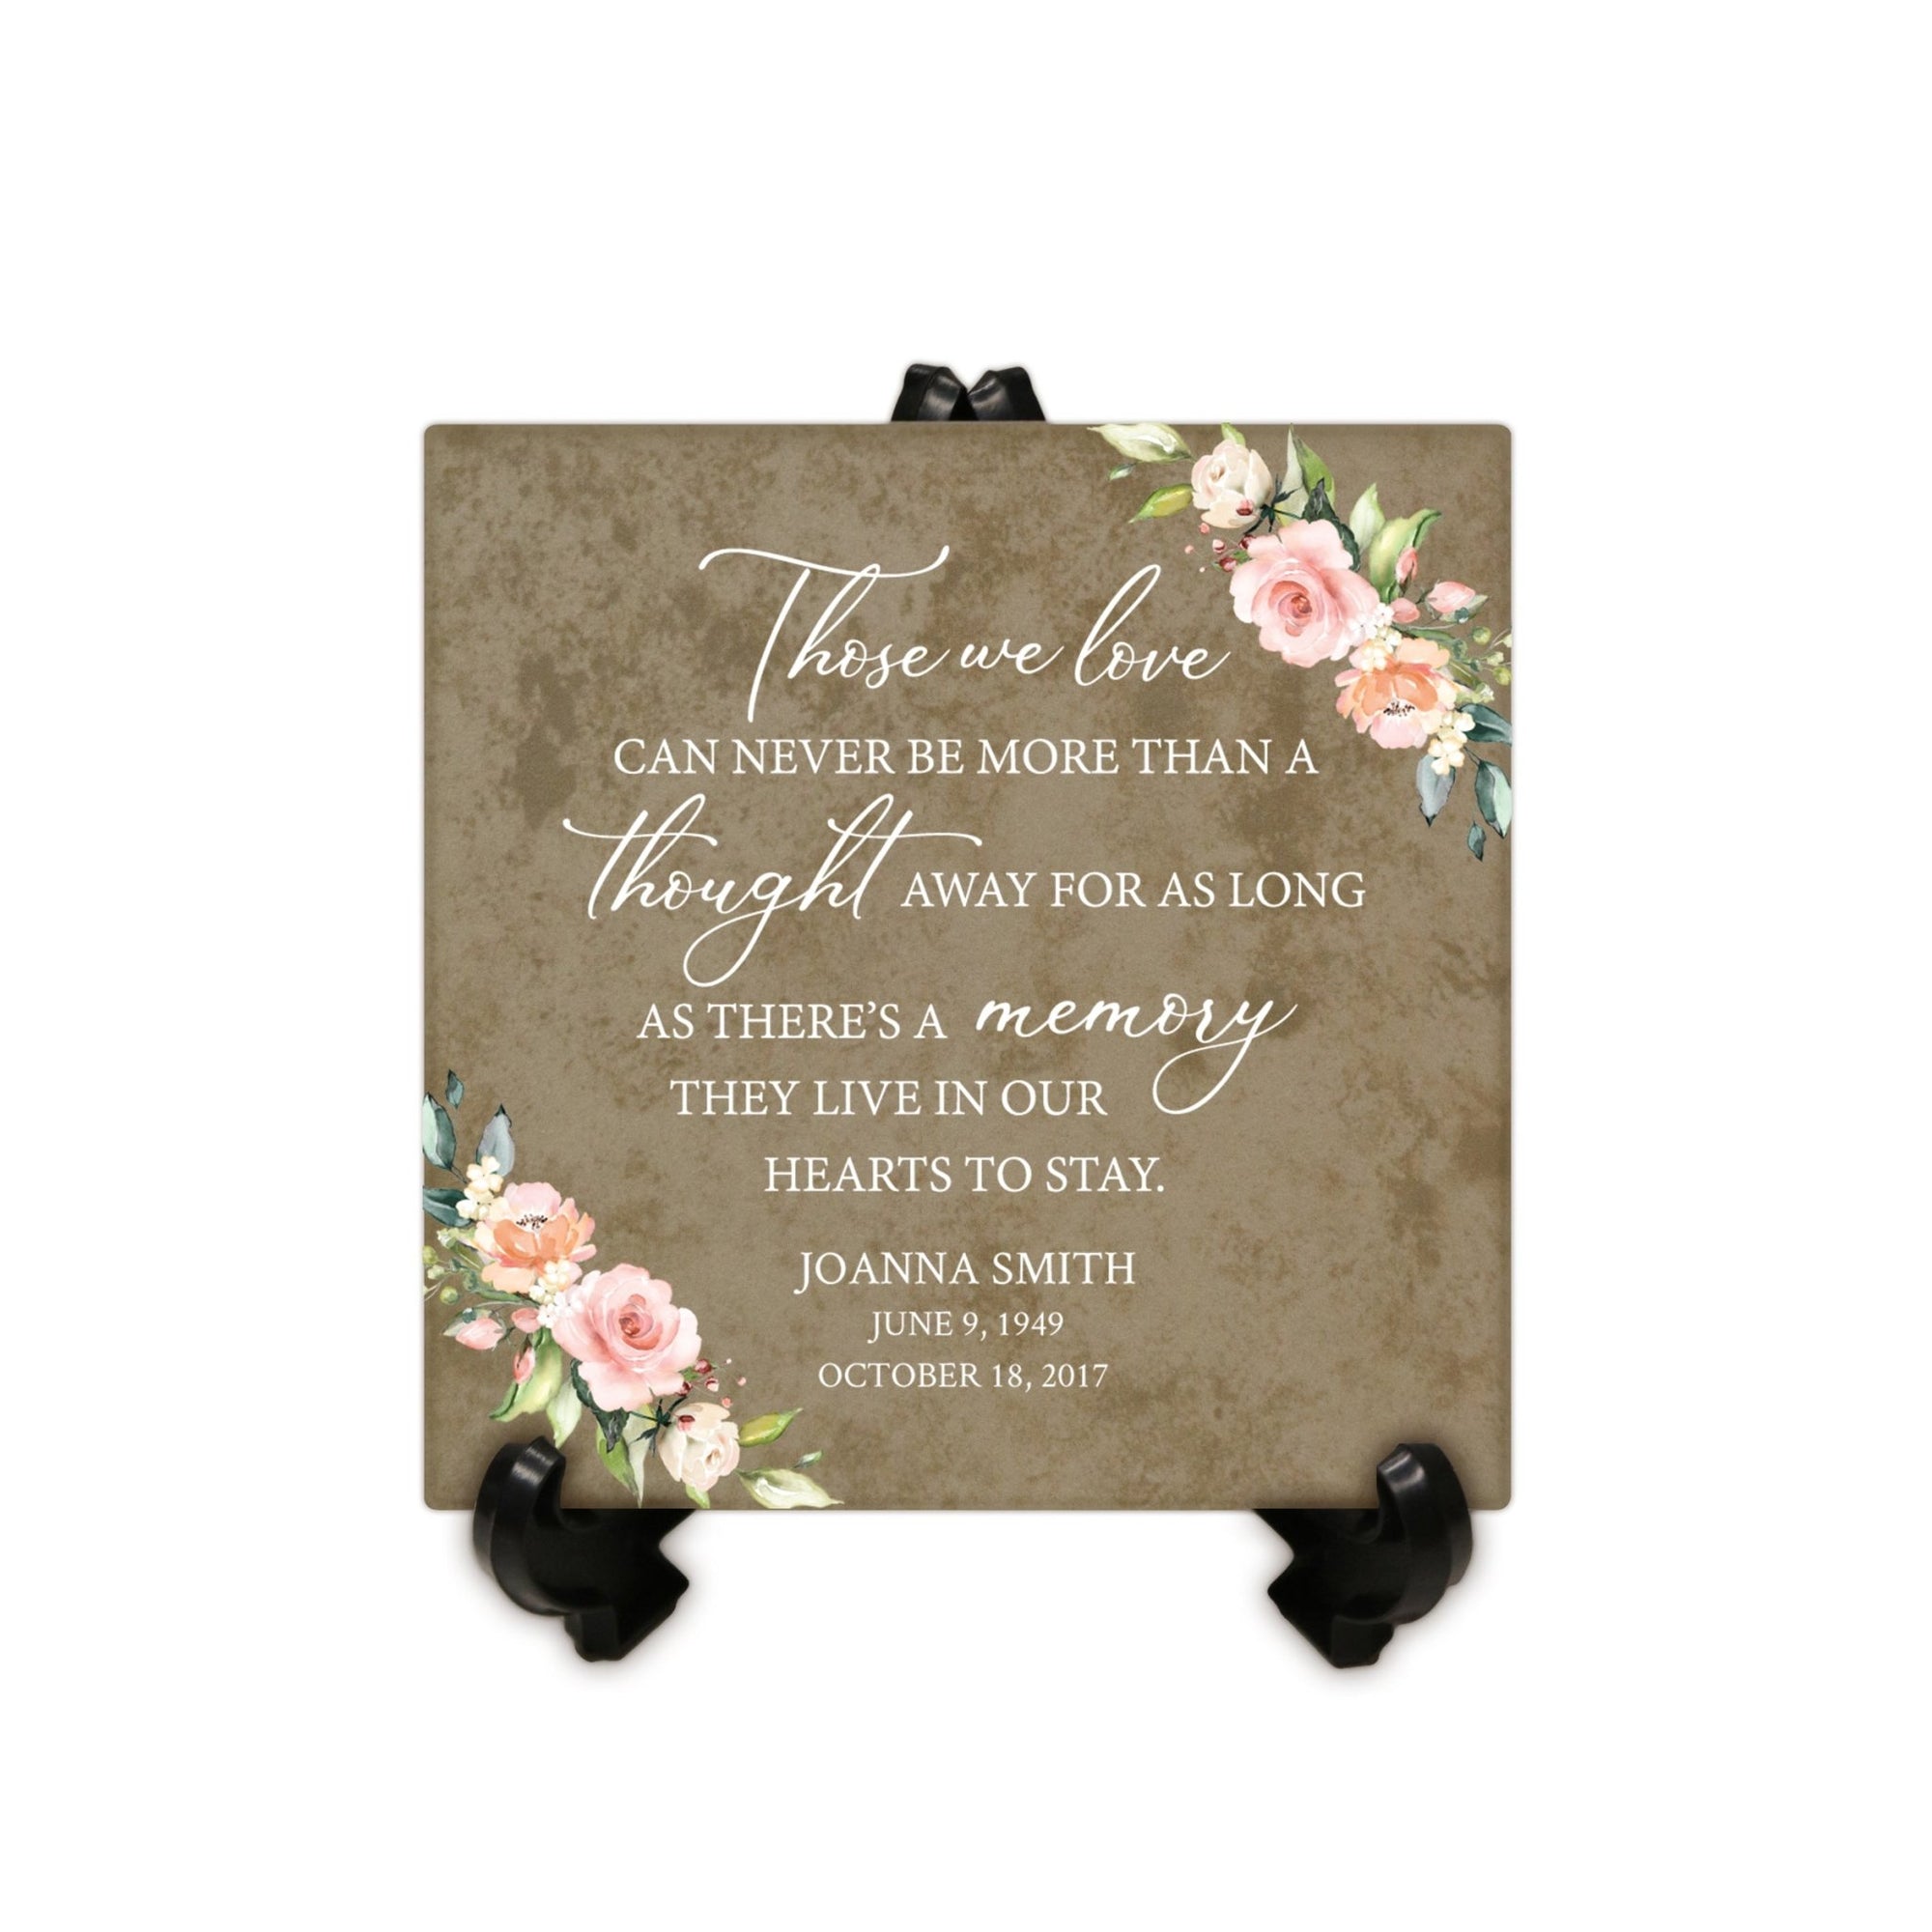 Personalized Memorial Ceramic Trivet with Stand for Home Decor - Those We Love Can Never - LifeSong Milestones